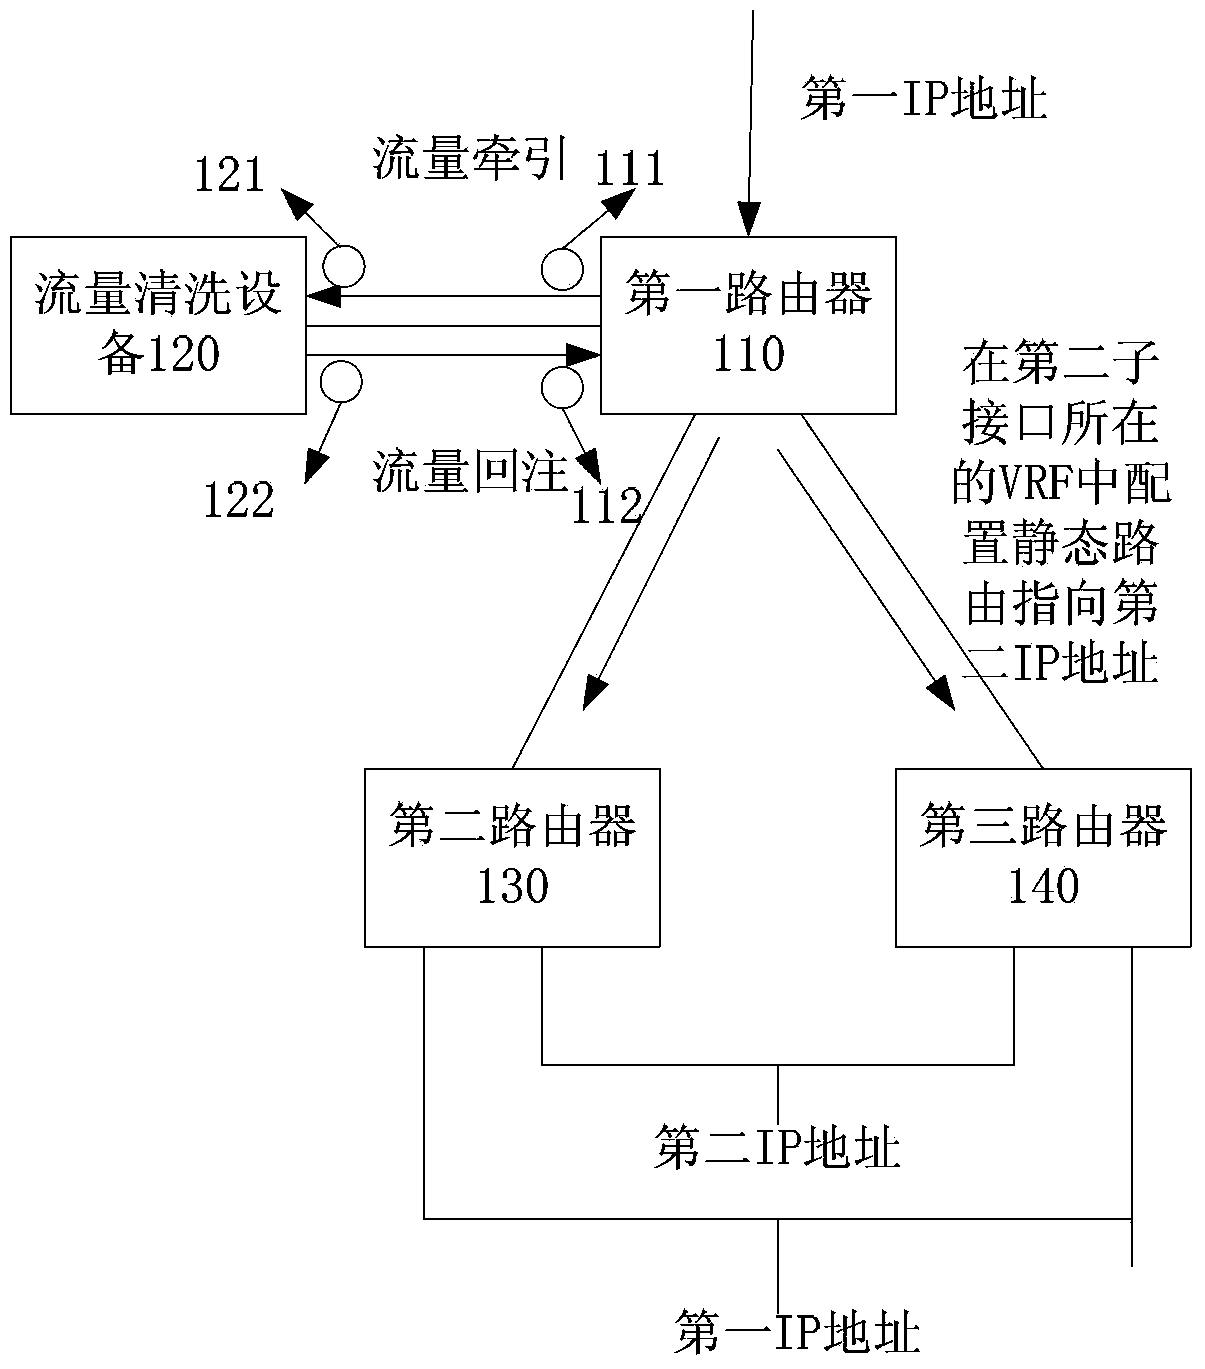 Network traffic cleaning system and method